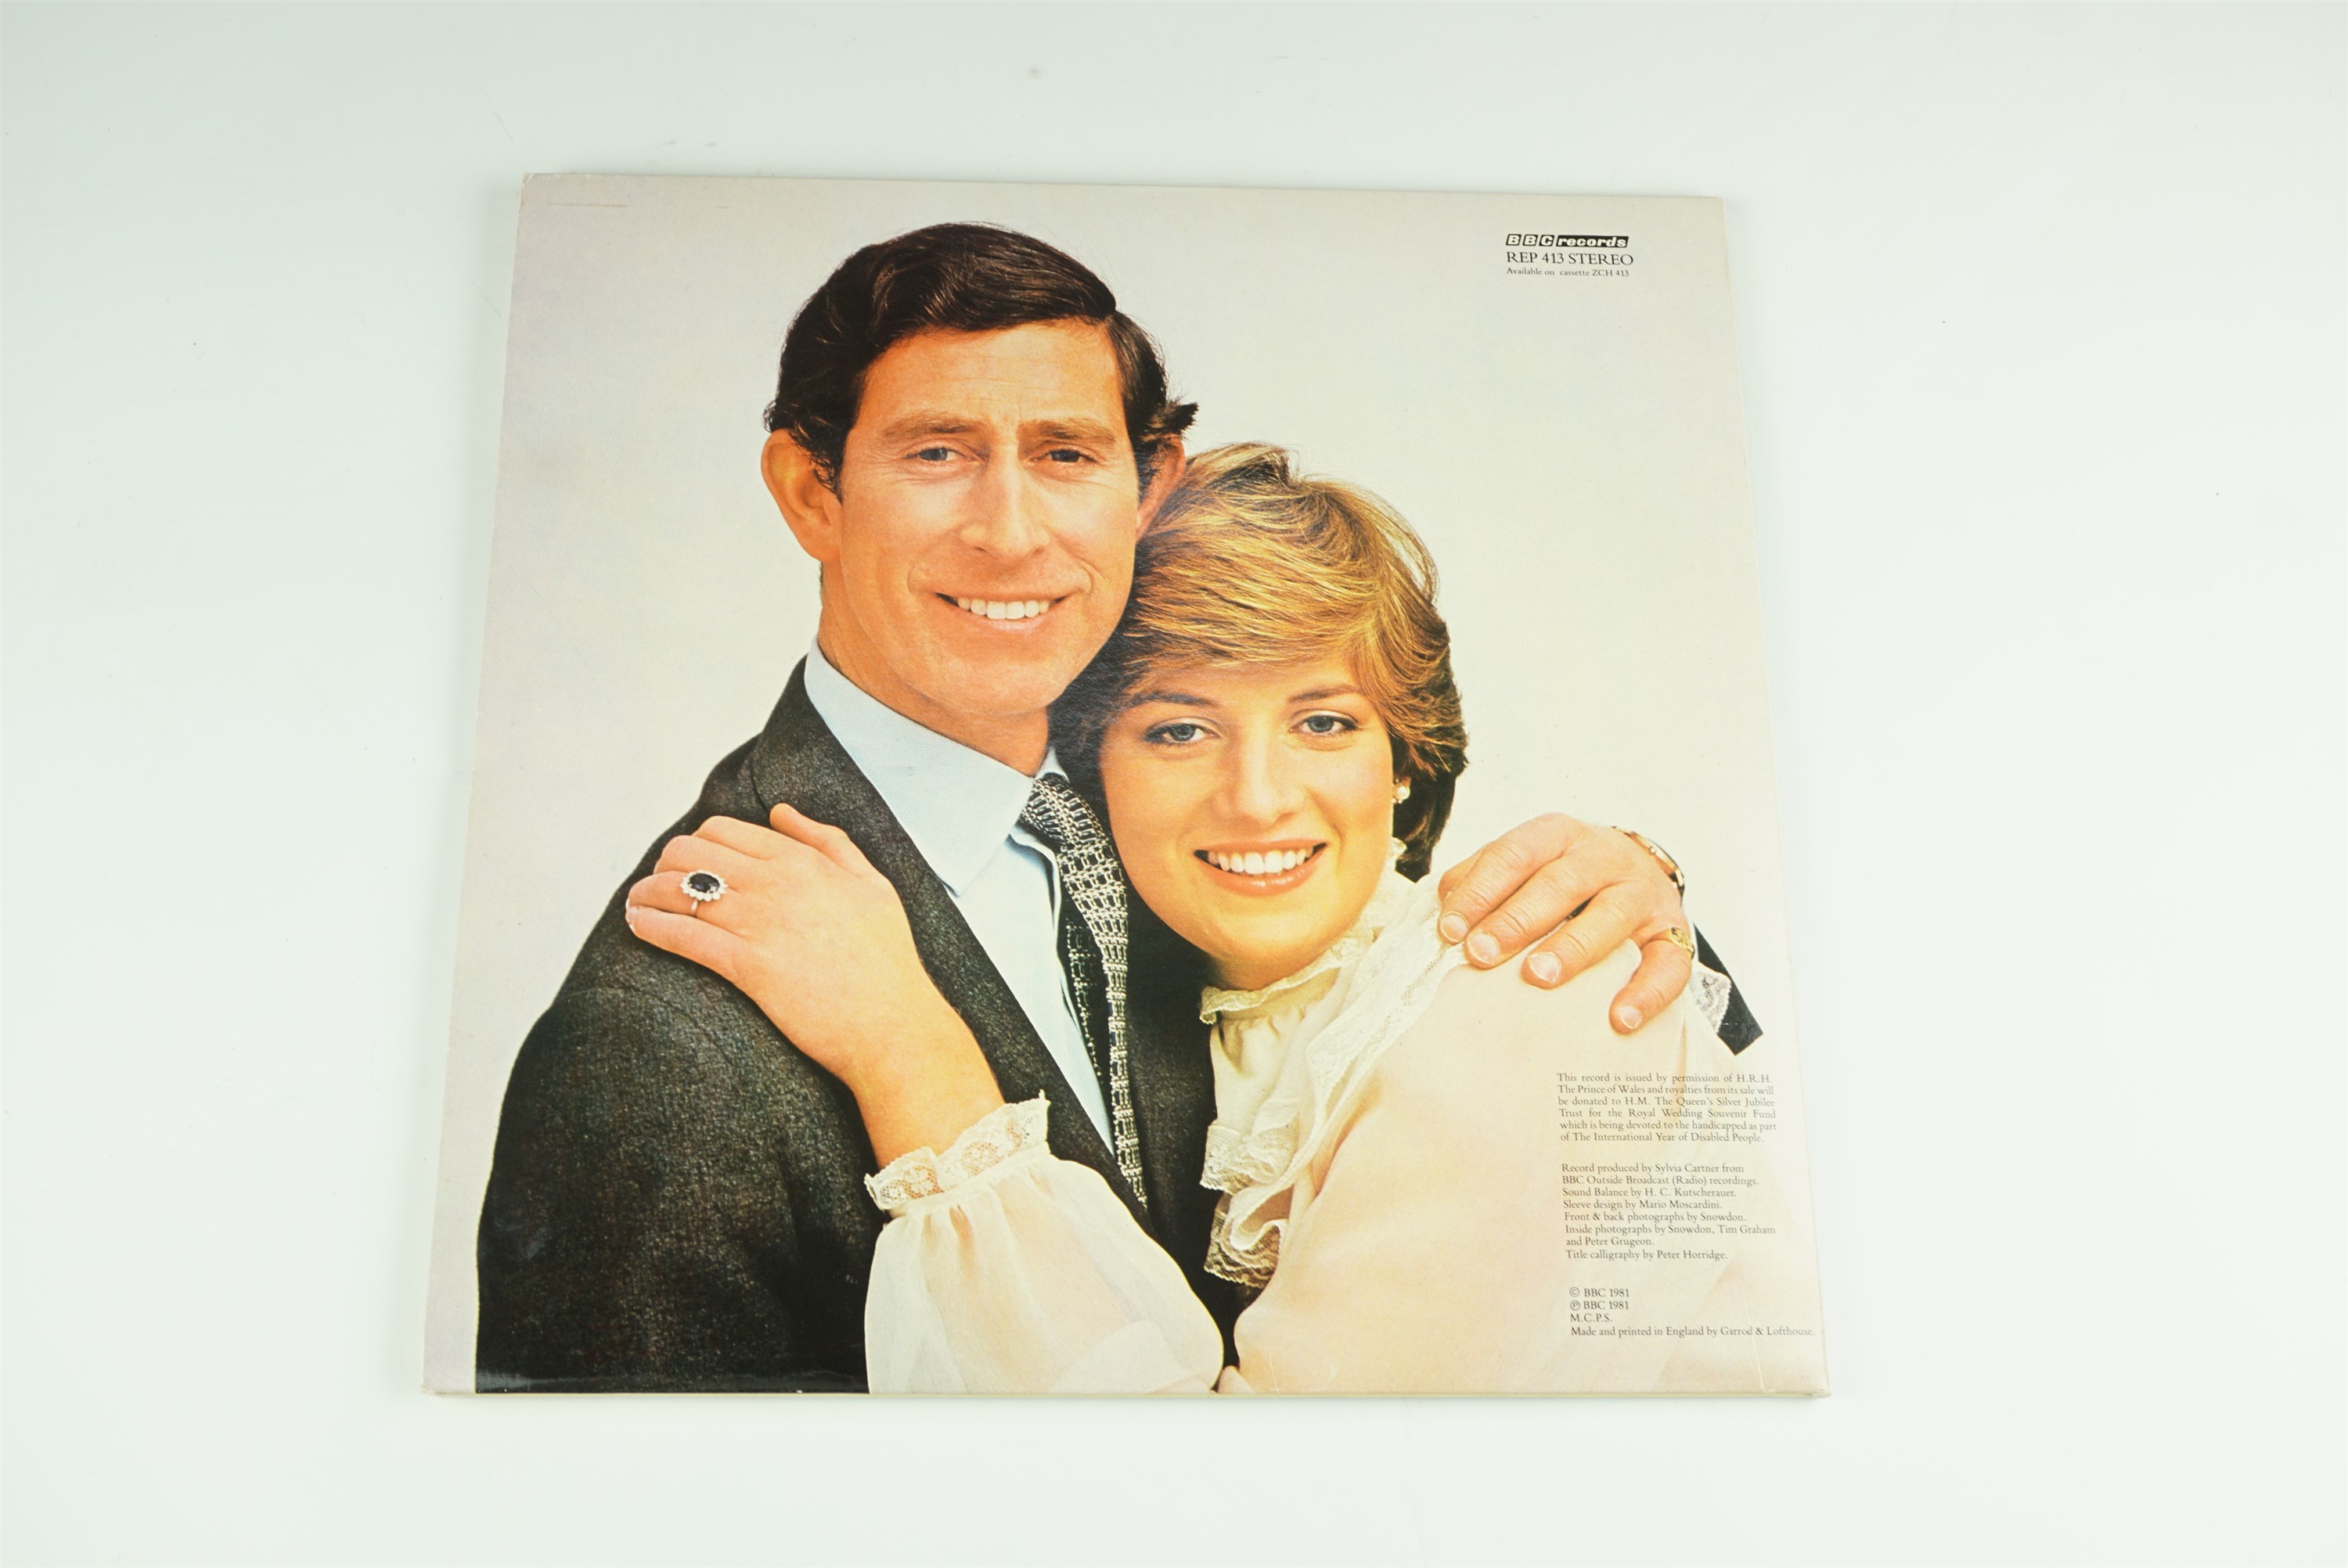 A BBC vinyl record recording of "The Royal Wedding of HRH The Prince of Wales and Lady Diana Spencer - Image 3 of 3